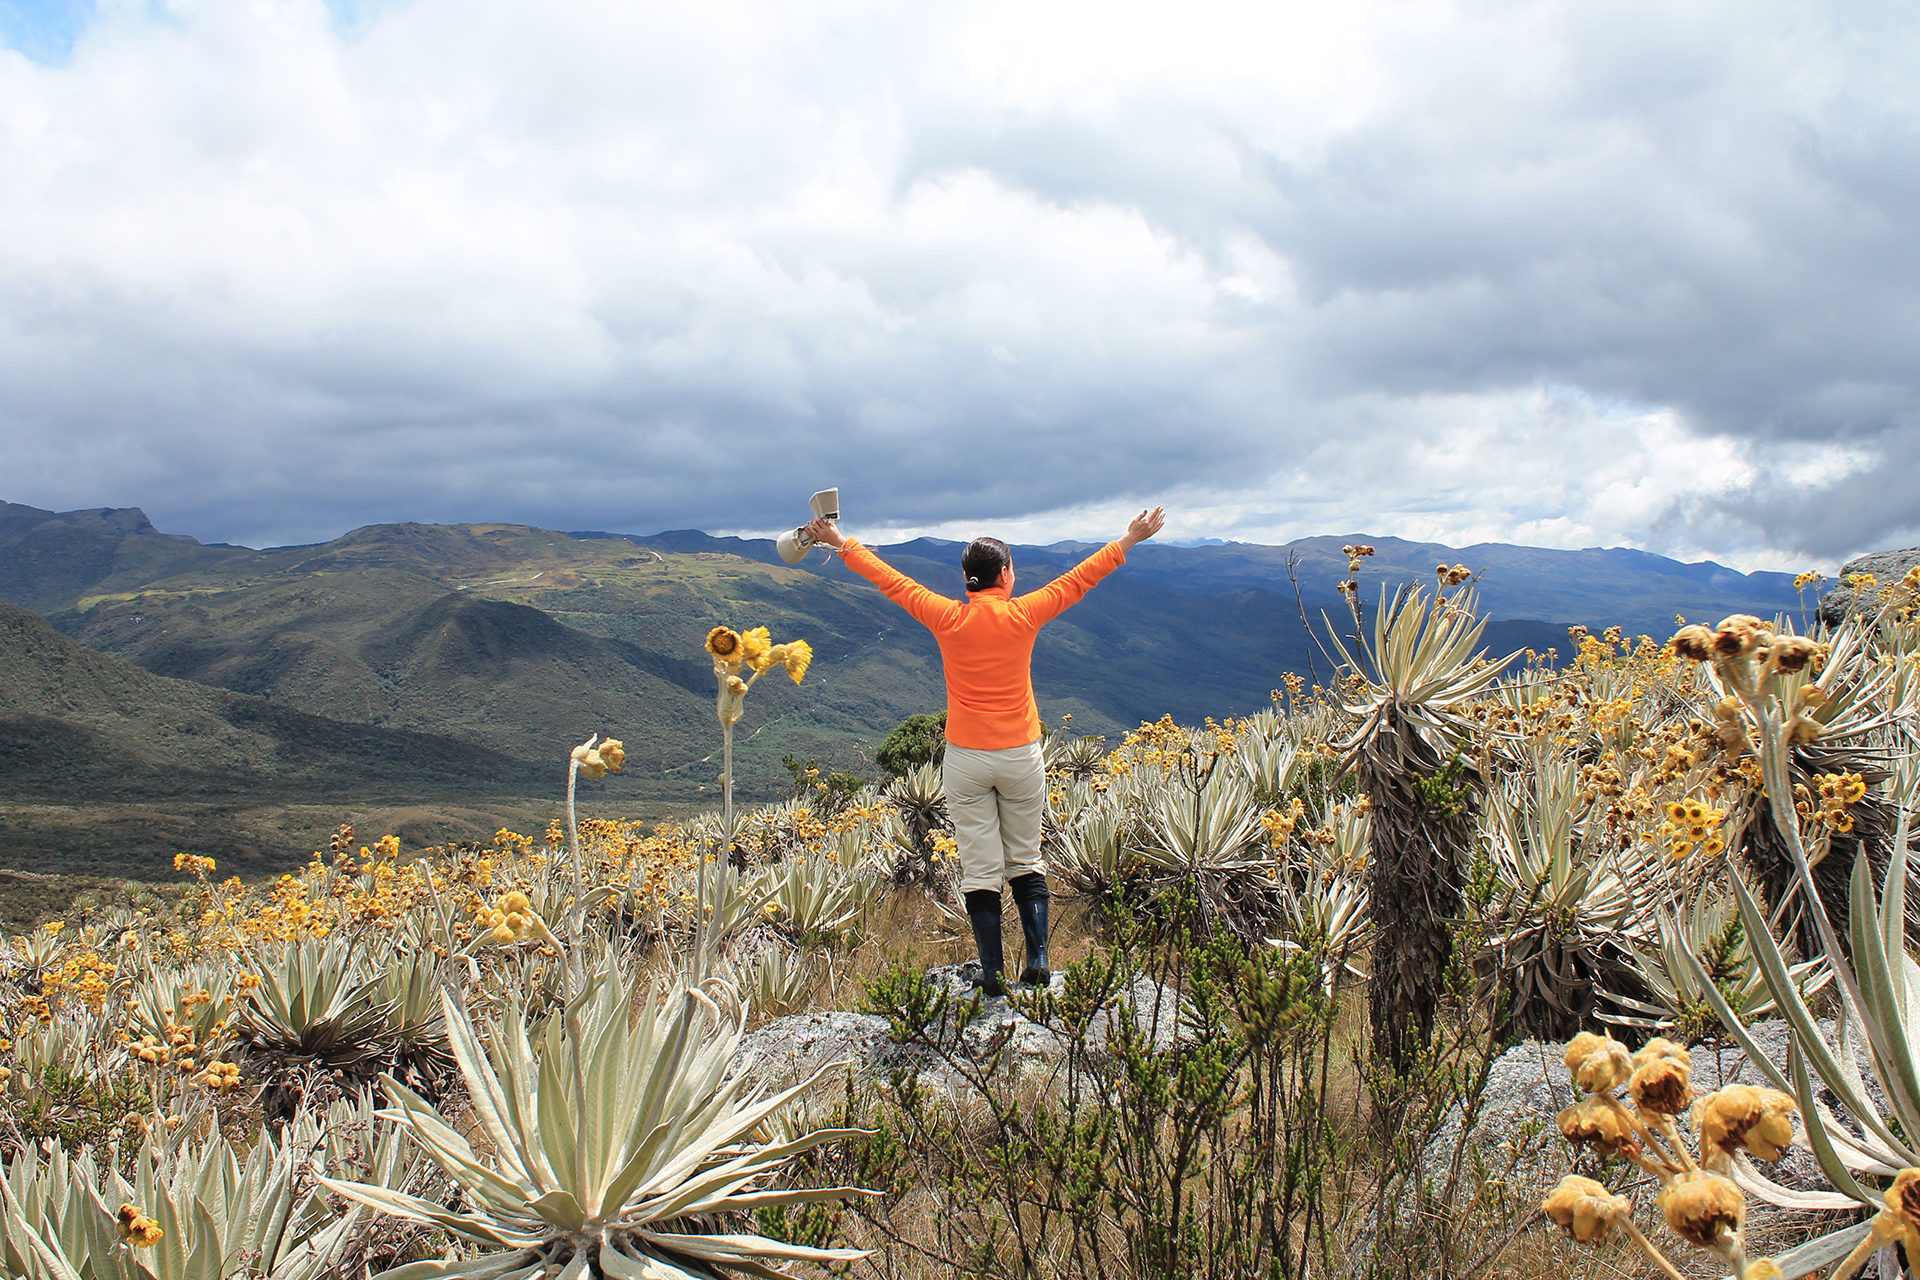 A person in an orange shirt and black boots raises their arms while standing in a rugged, mountainous landscape with cloudy skies and yellow flowers—reminiscent of the stunning vistas seen on Bogotá city tours.